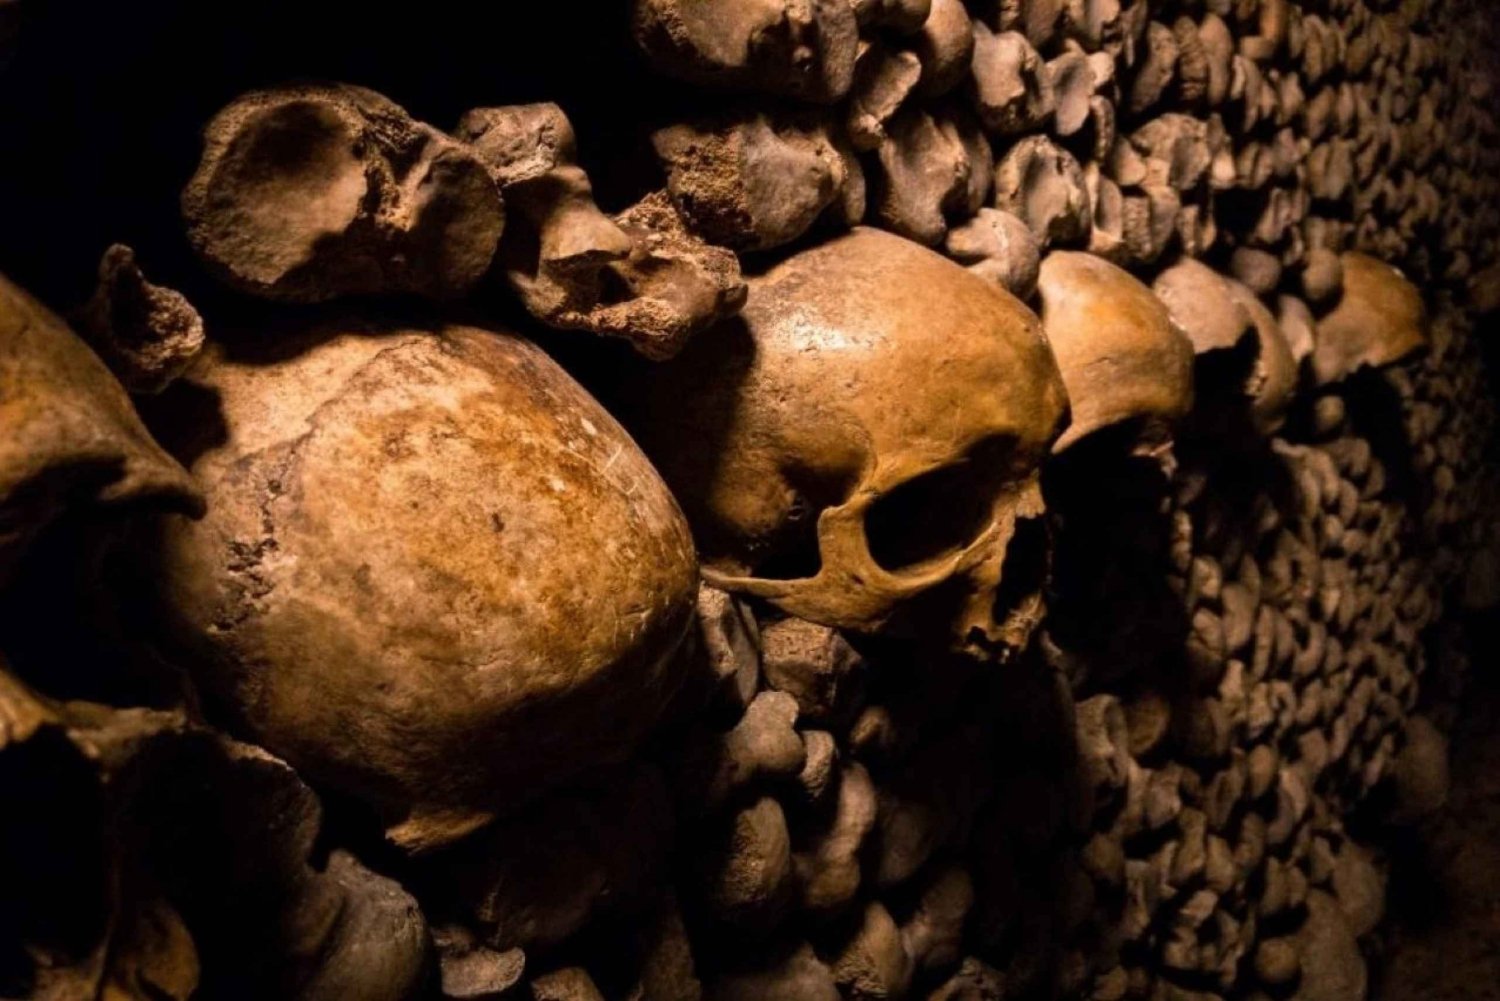 Paris: Catacombs Entry Ticket, Audio Guide, and River Cruise